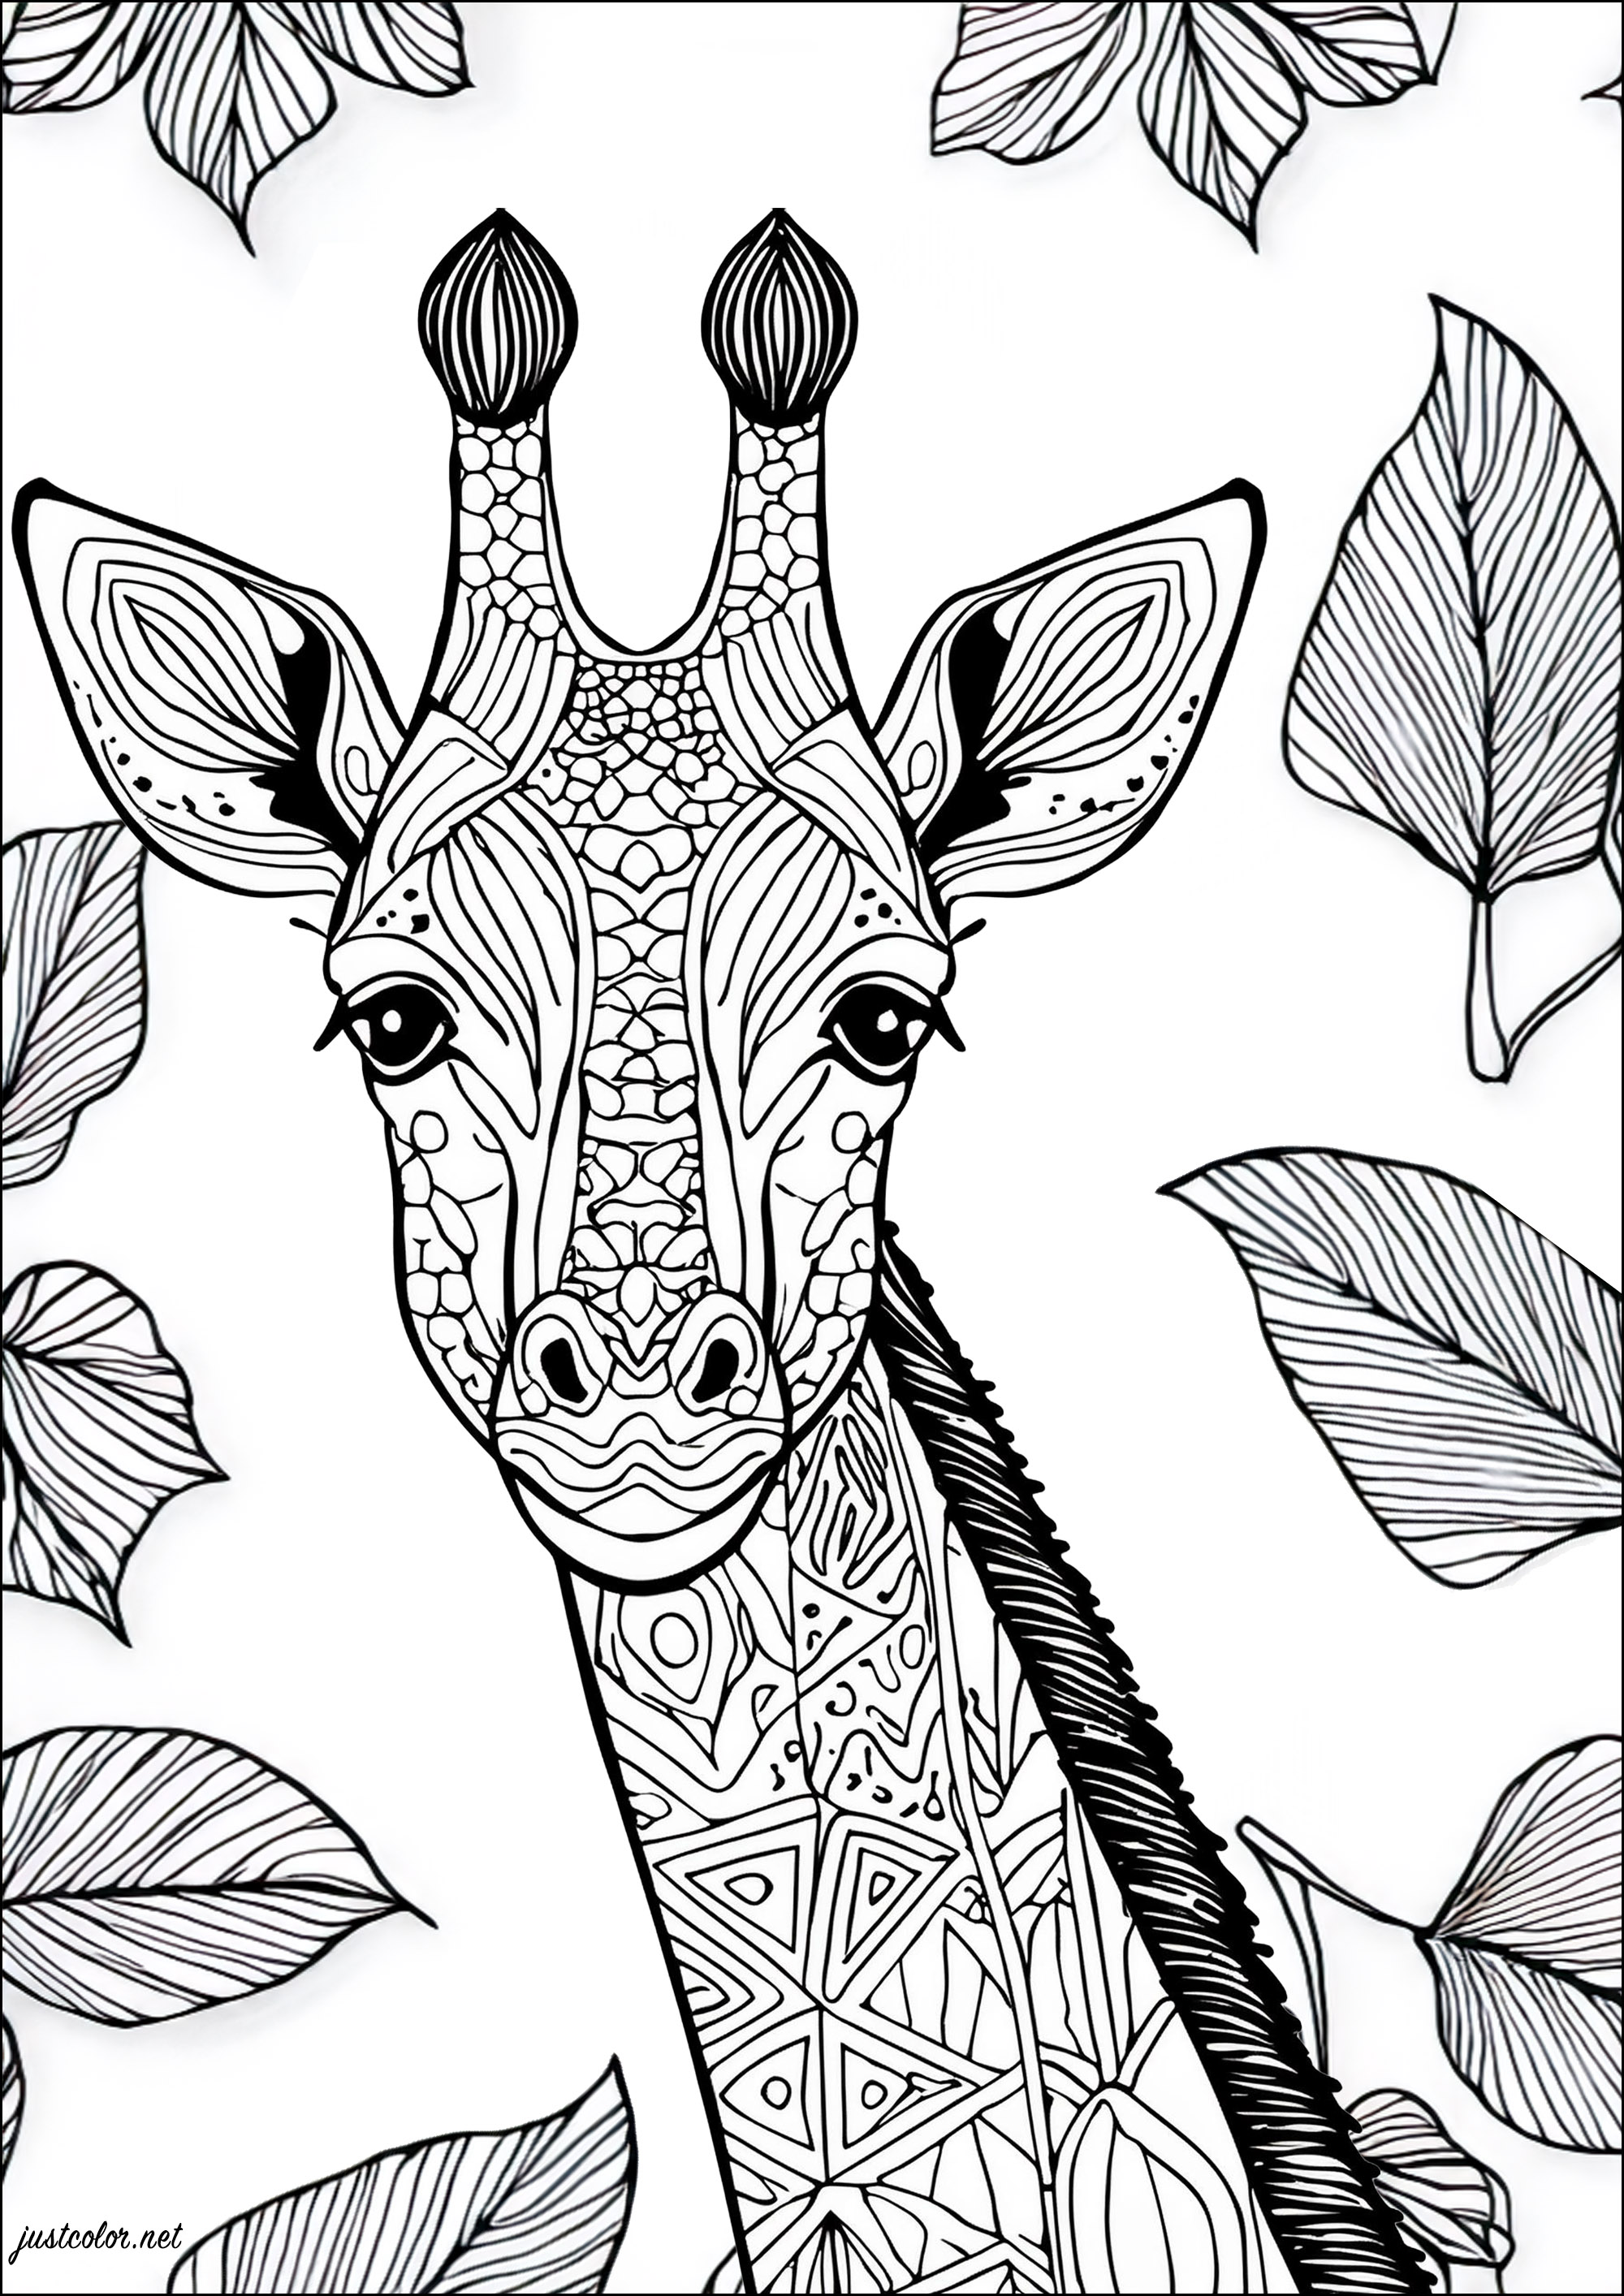 Beautiful Giraffe with leaf background. Pretty patterns to color in the giraffe, and leaves with fairly tight veins.